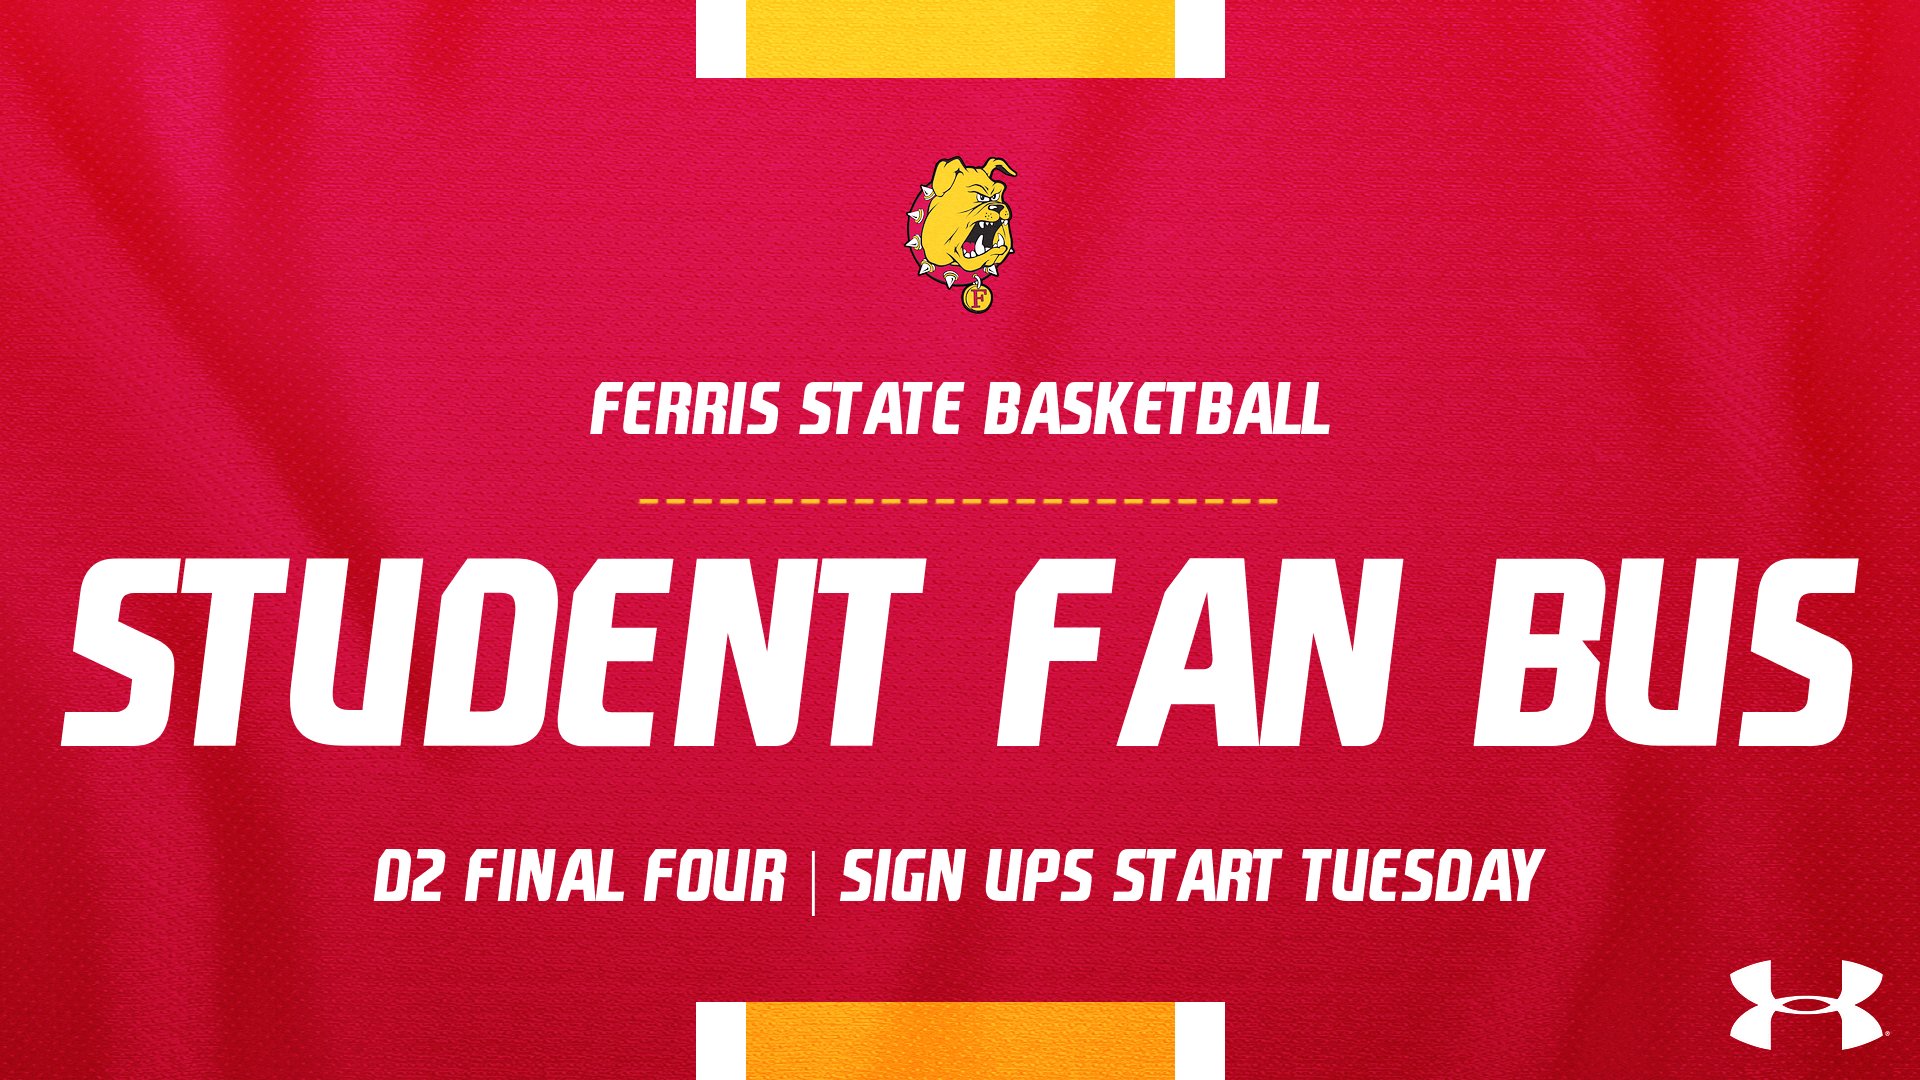 FAN BUS! Sign Ups Start Tuesday For Ferris State D2 Final Four Student Fan Bus Trip